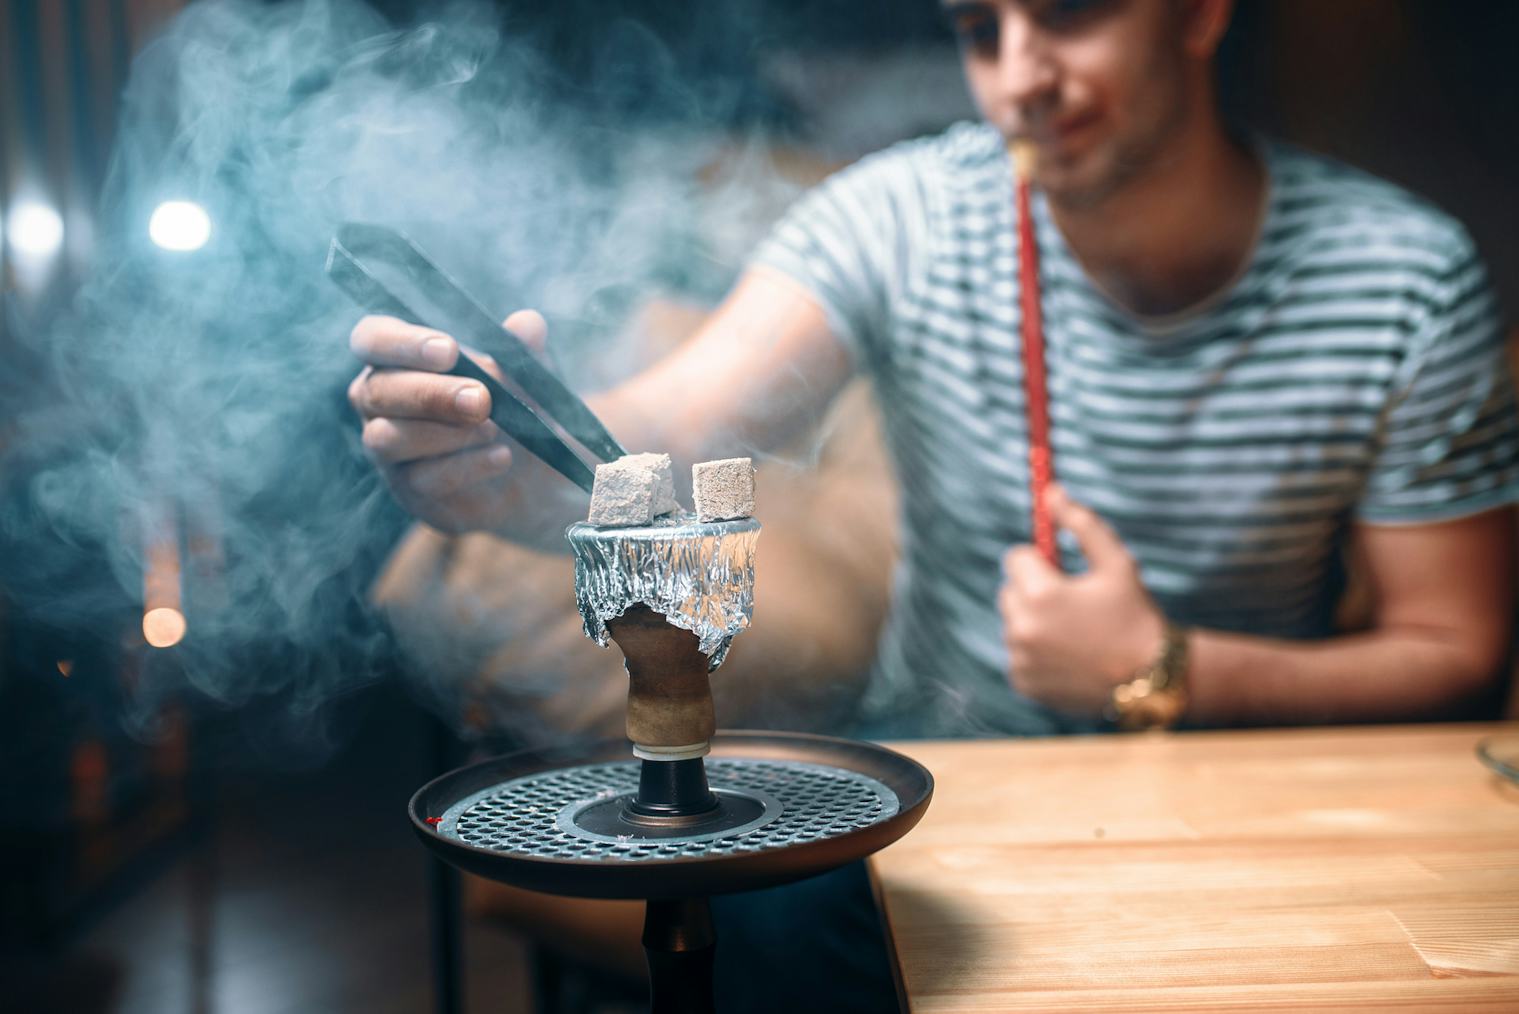 Hookah Smoke Is Not Safe For Pregnant Women To Be Around Experts Say 